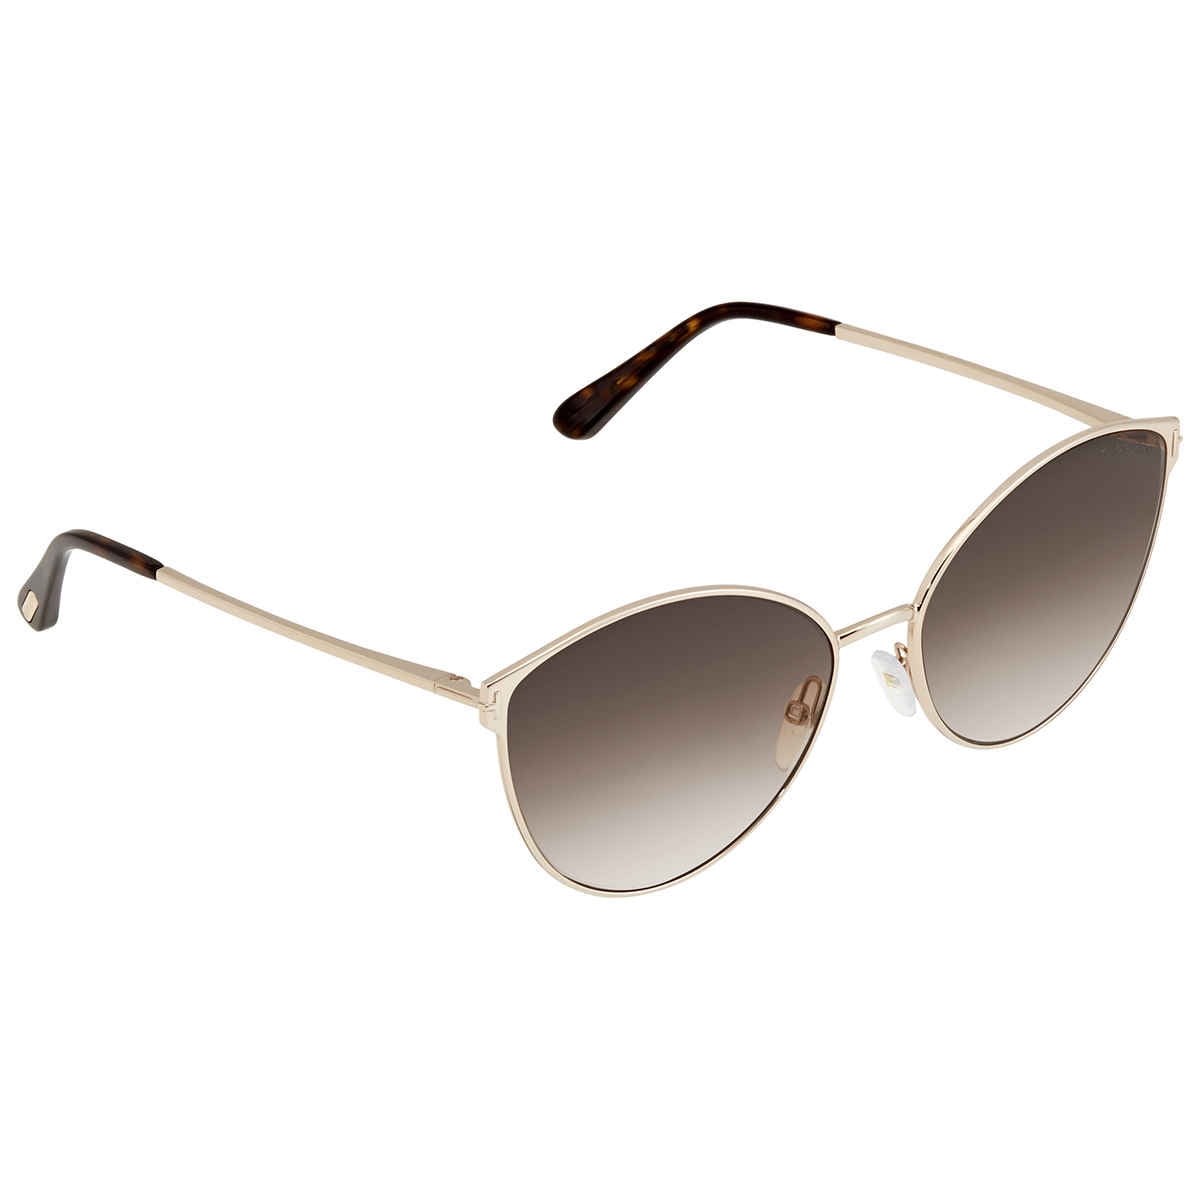 Sunglasses Tom Ford FT 0654 Zeila 28F shiny rose gold/gradient brown 